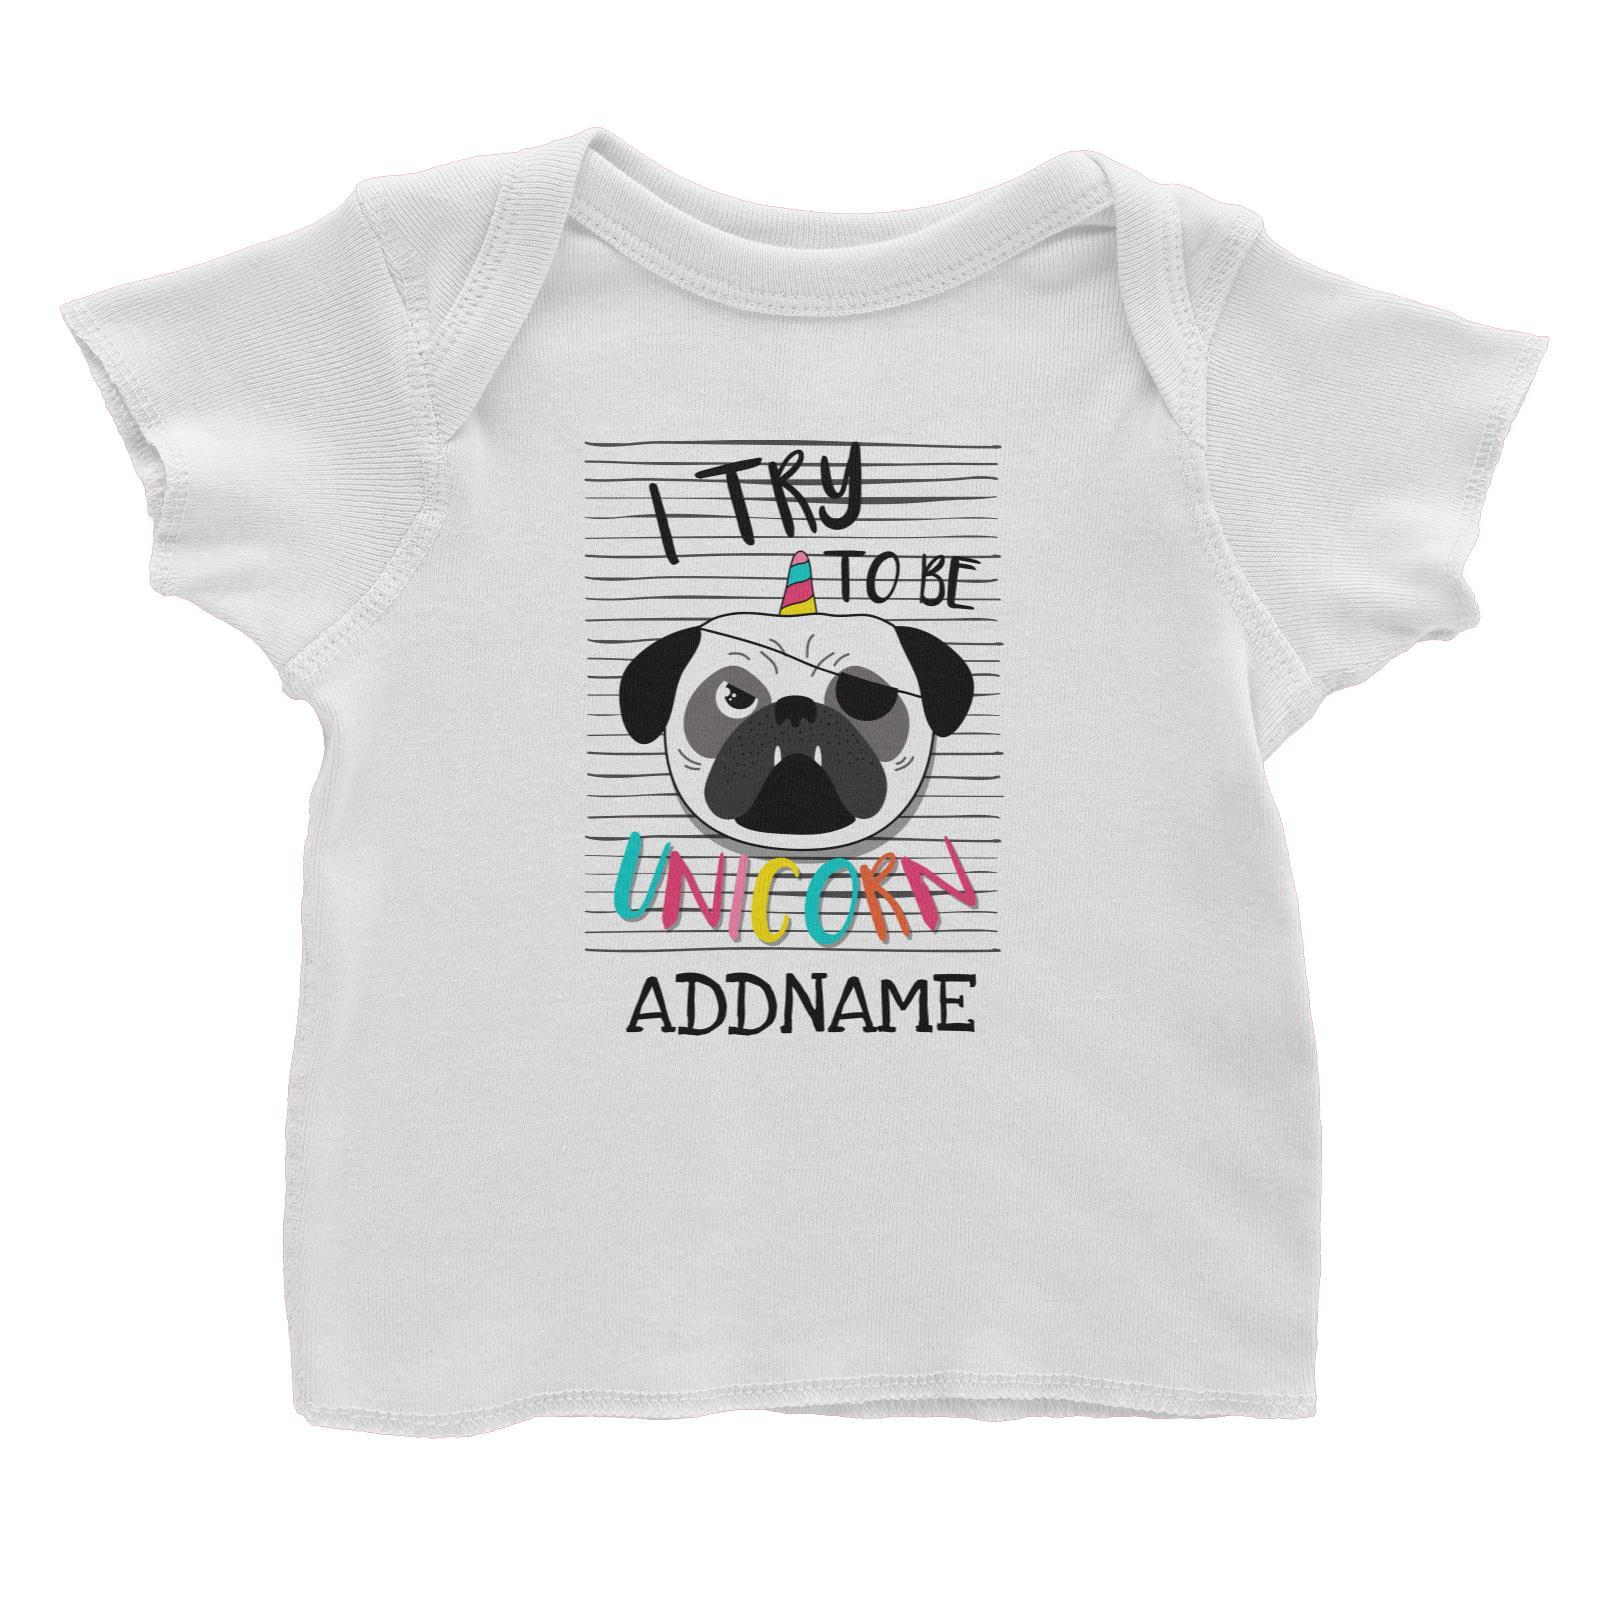 I Try to Be Unicorn Pug Addname Baby T-Shirt